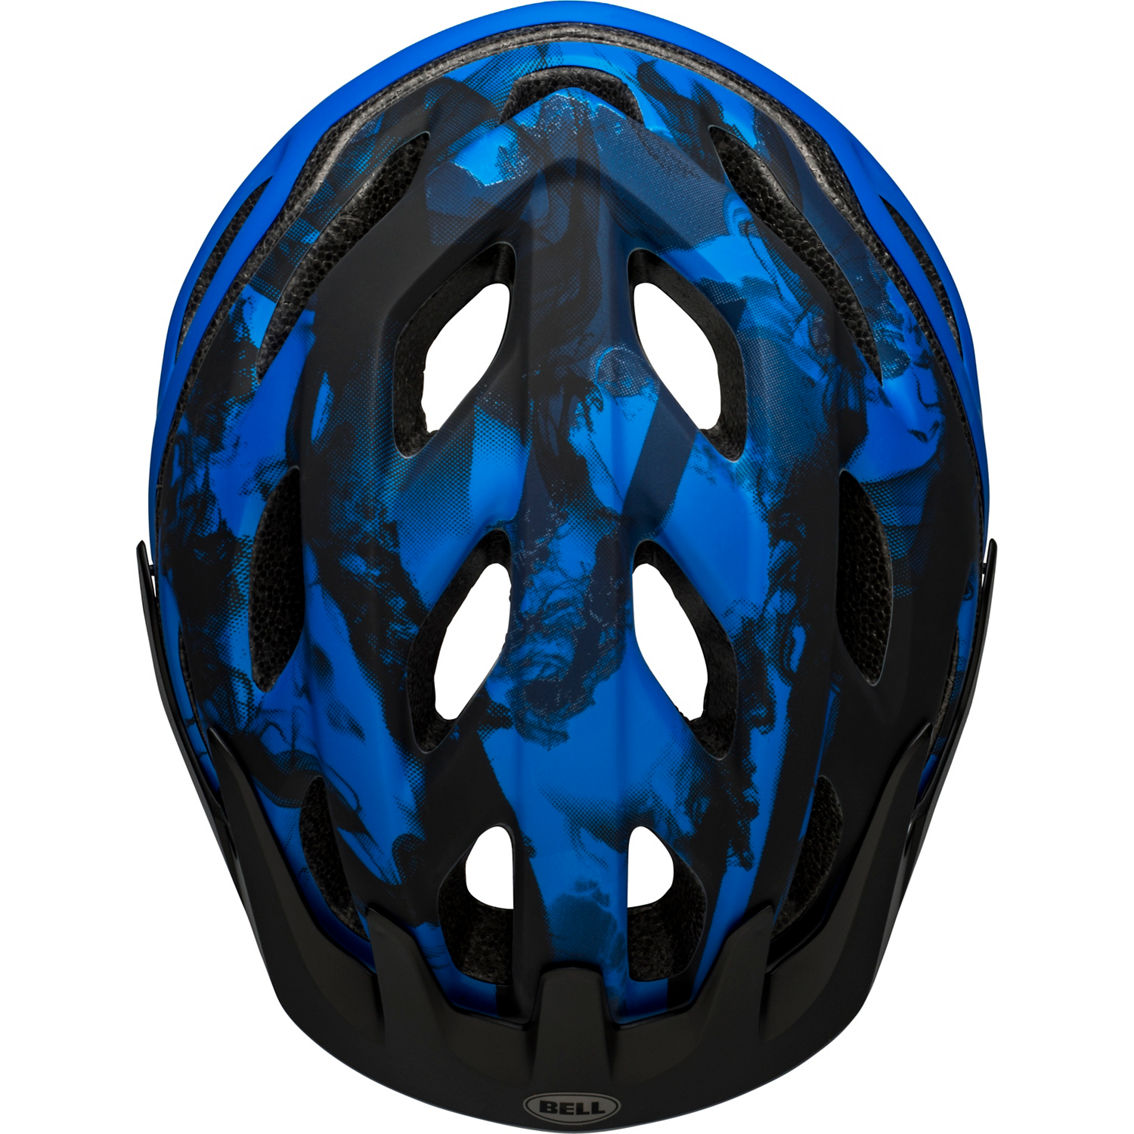 Bell Sports Boys Cadence Frenzy Youth Helmet - Image 3 of 3